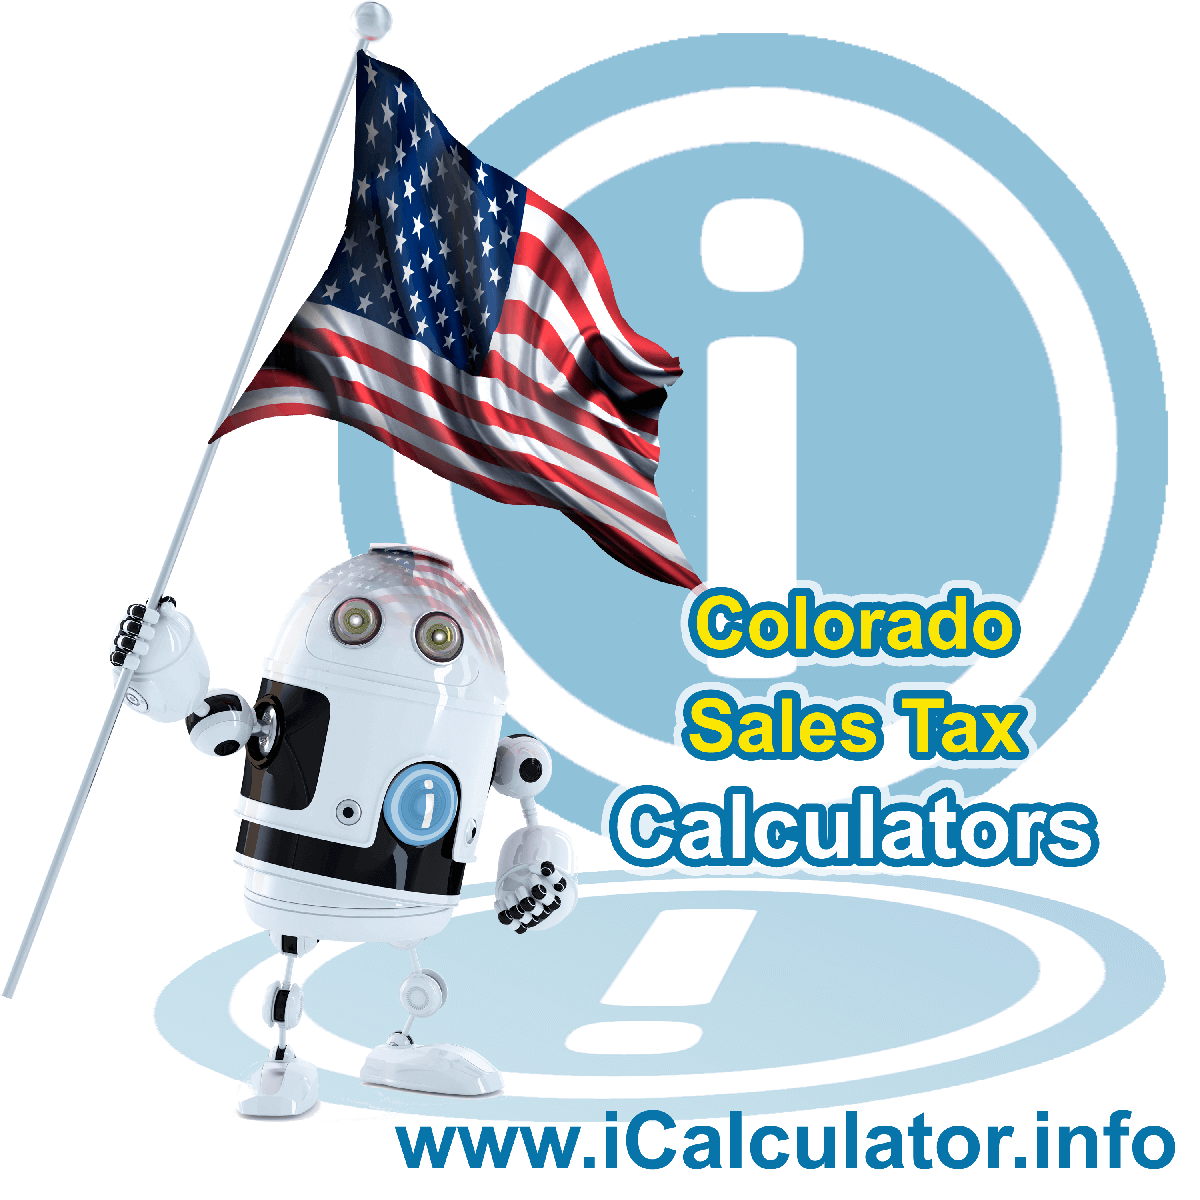 Adams County Remainder Cultur Sales Rates: This image illustrates a calculator robot calculating Adams County Remainder Cultur sales tax manually using the Adams County Remainder Cultur Sales Tax Formula. You can use this information to calculate Adams County Remainder Cultur Sales Tax manually or use the Adams County Remainder Cultur Sales Tax Calculator to calculate sales tax online.